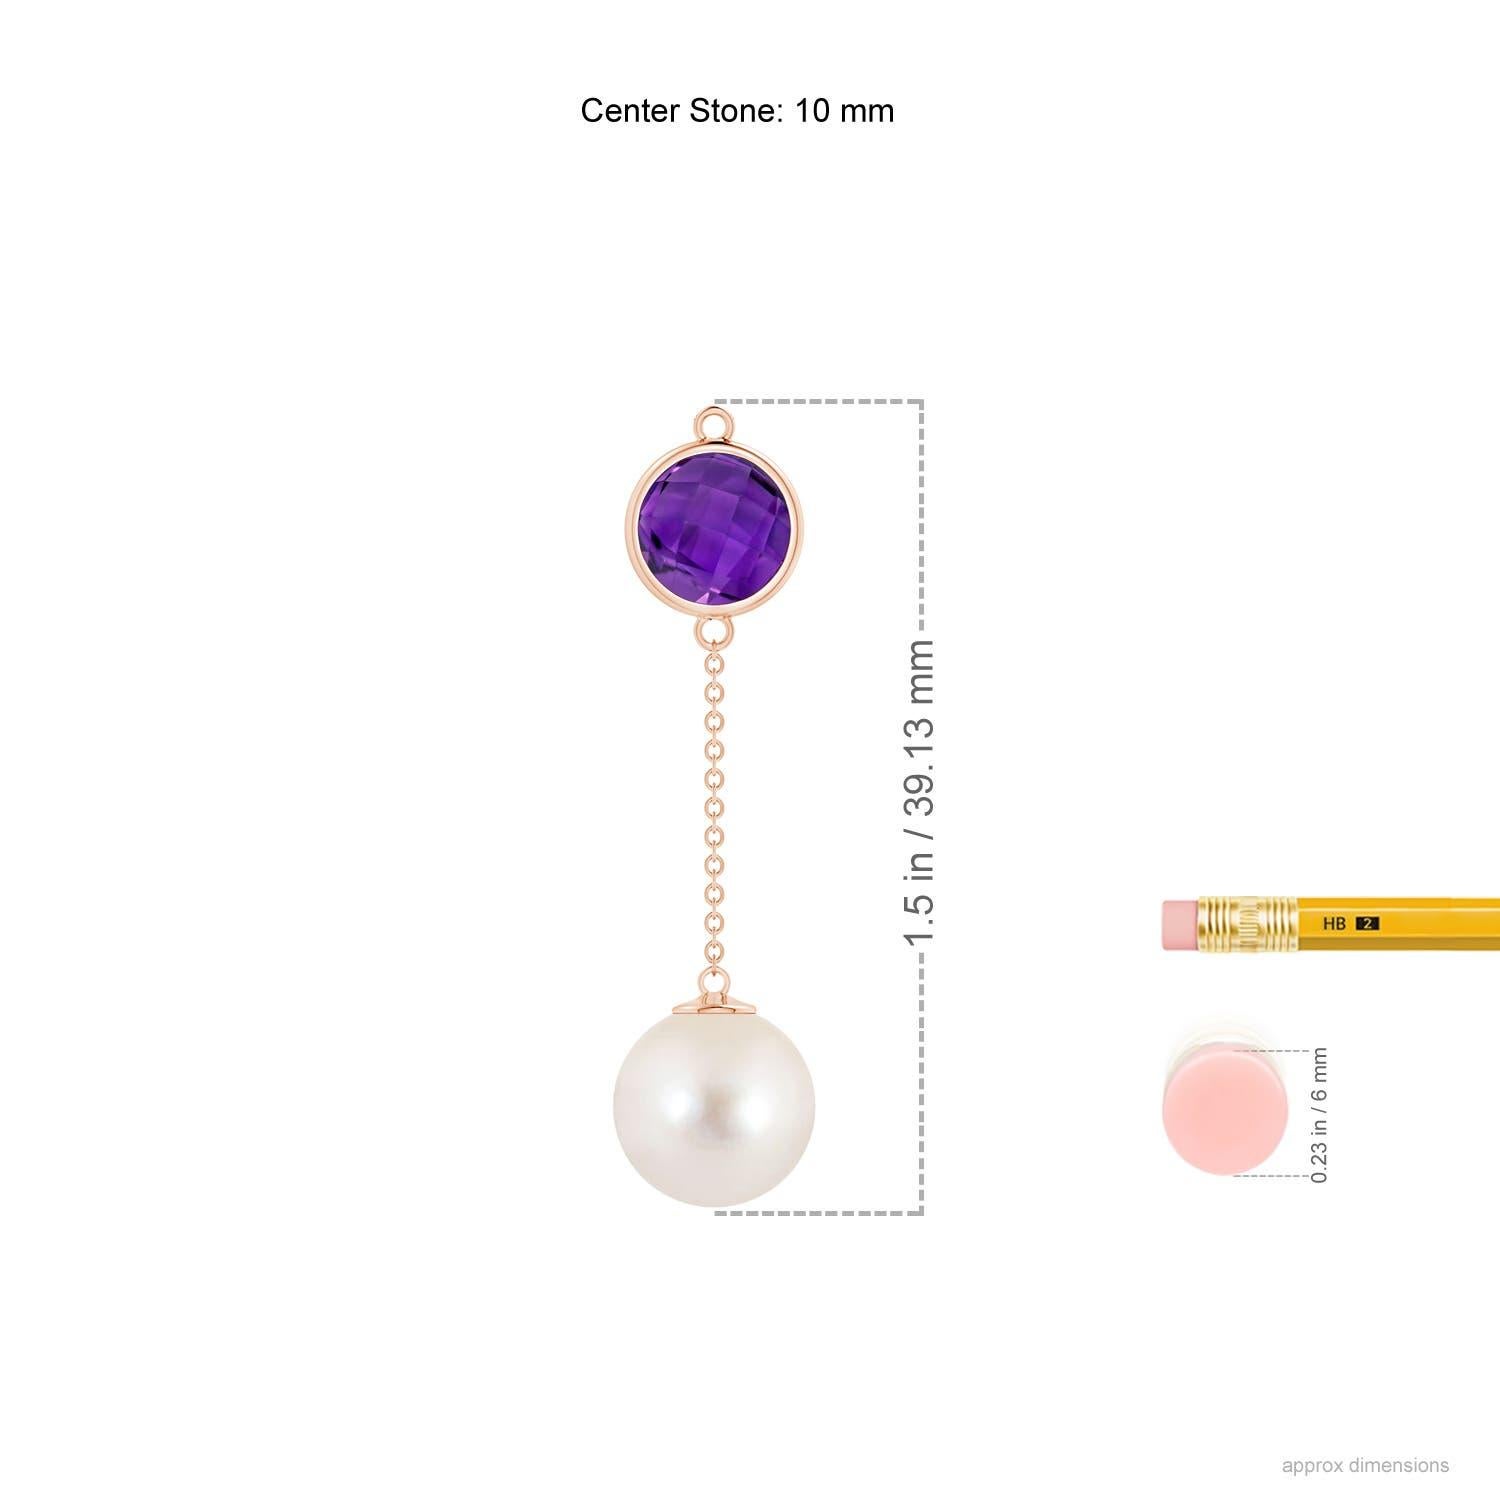 This 14k rose gold lariat style necklace draws the eye with its simple elegance. The Freshwater cultured pearl is linked to a bezel-set deep purple amethyst by a chain, forming a stylish long drop design.
Freshwater Cultured Pearl is the Birthstone